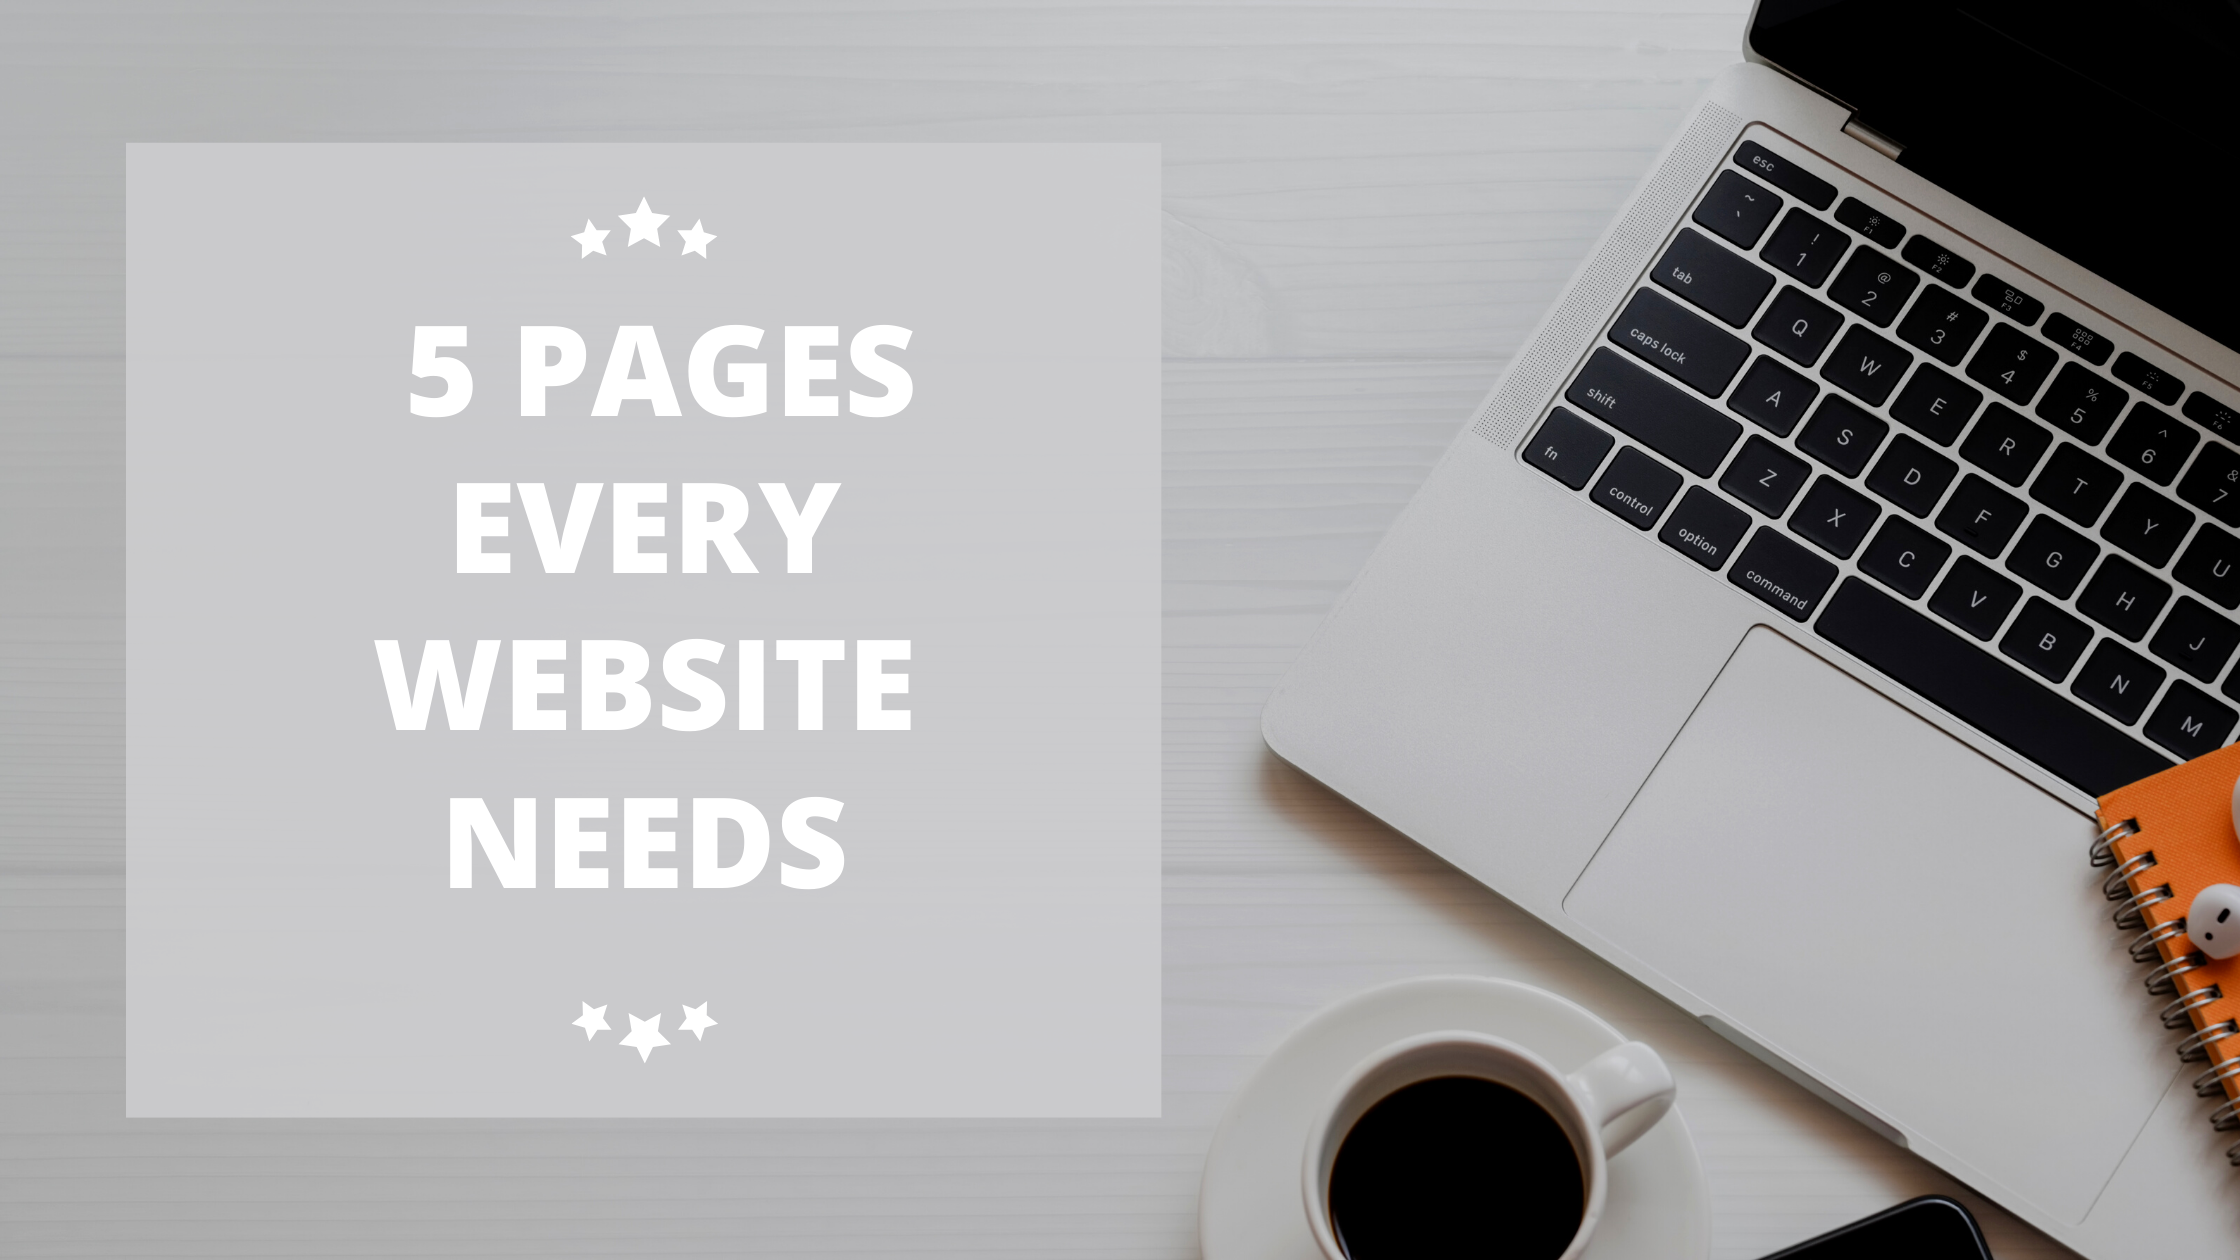 5 pages every website needs